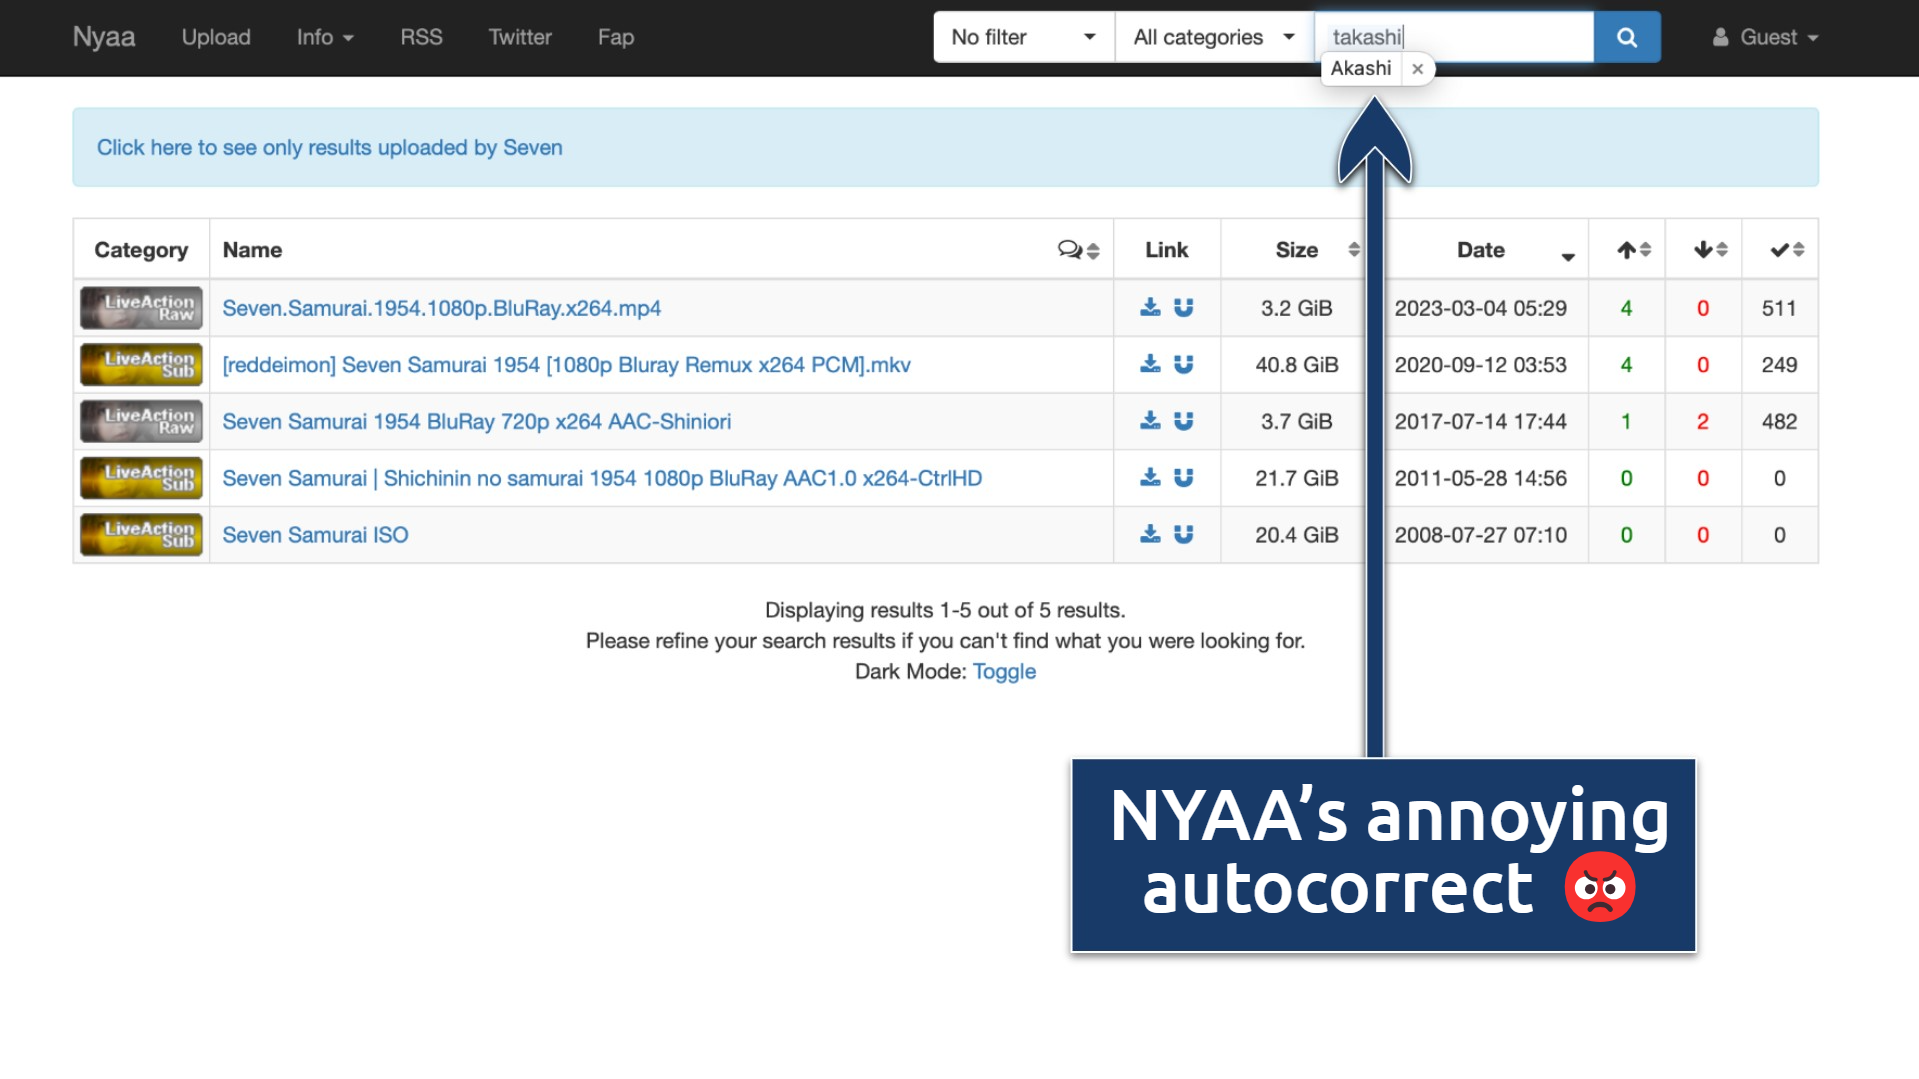 Screenshot of the NYAA search results page